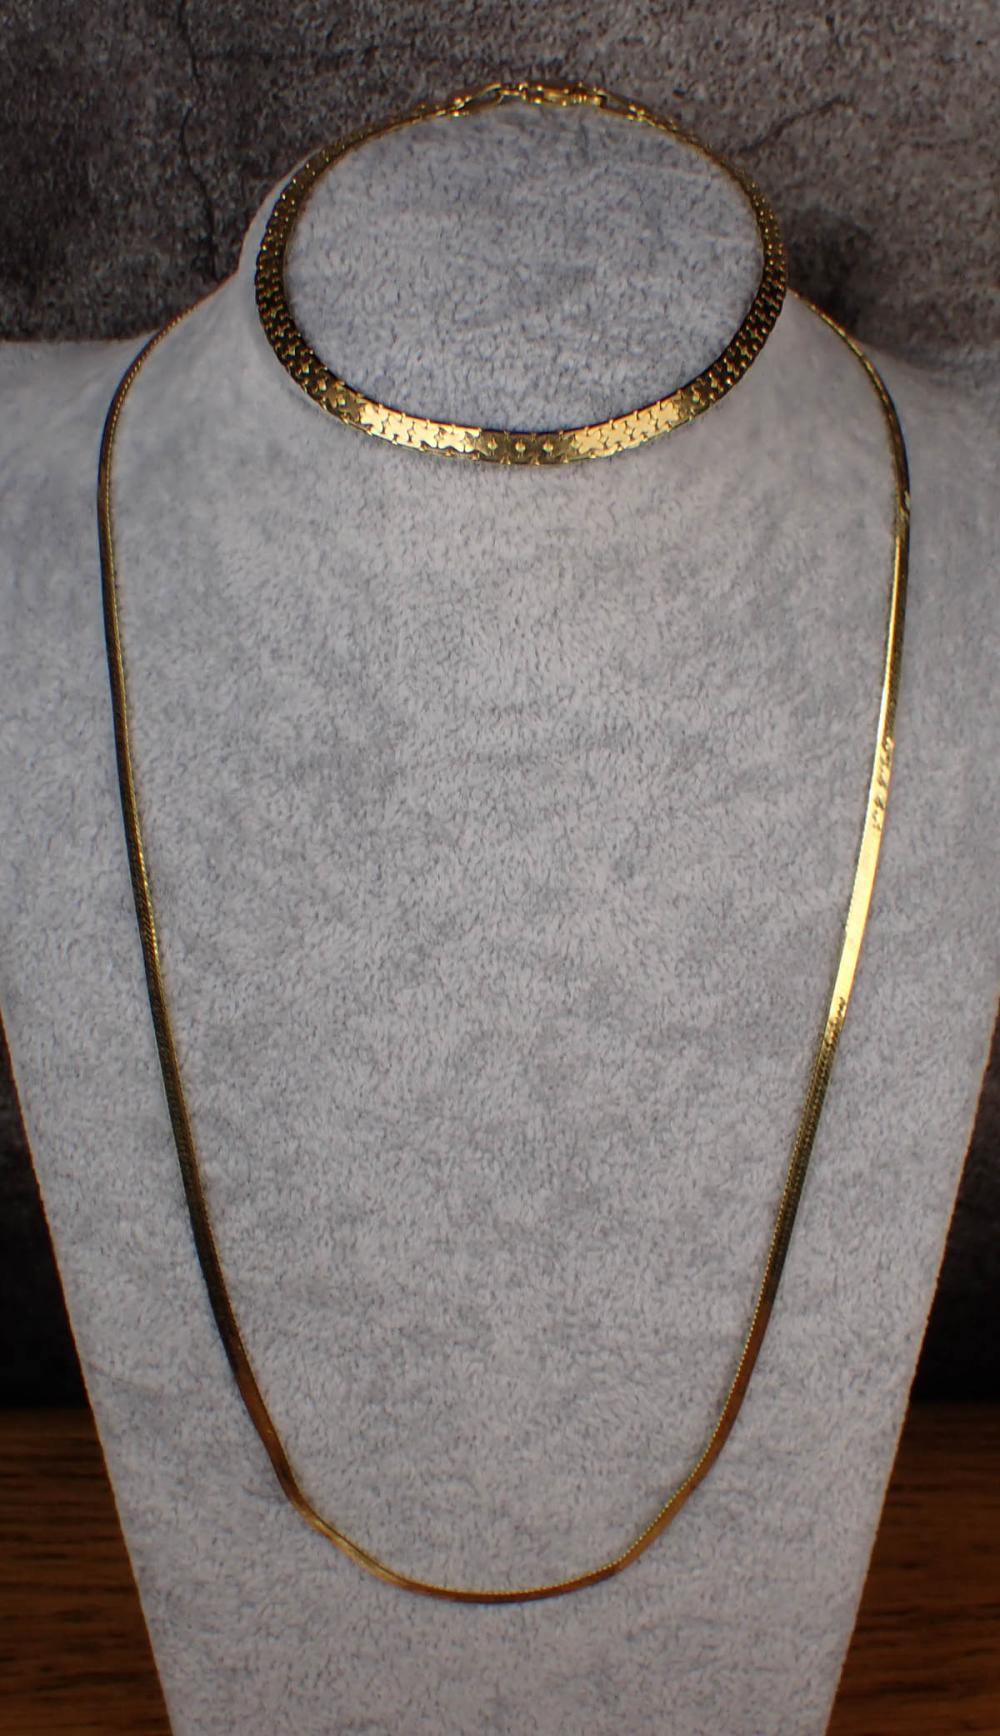 ITALIAN MADE GOLD NECKLACE AND 340d05